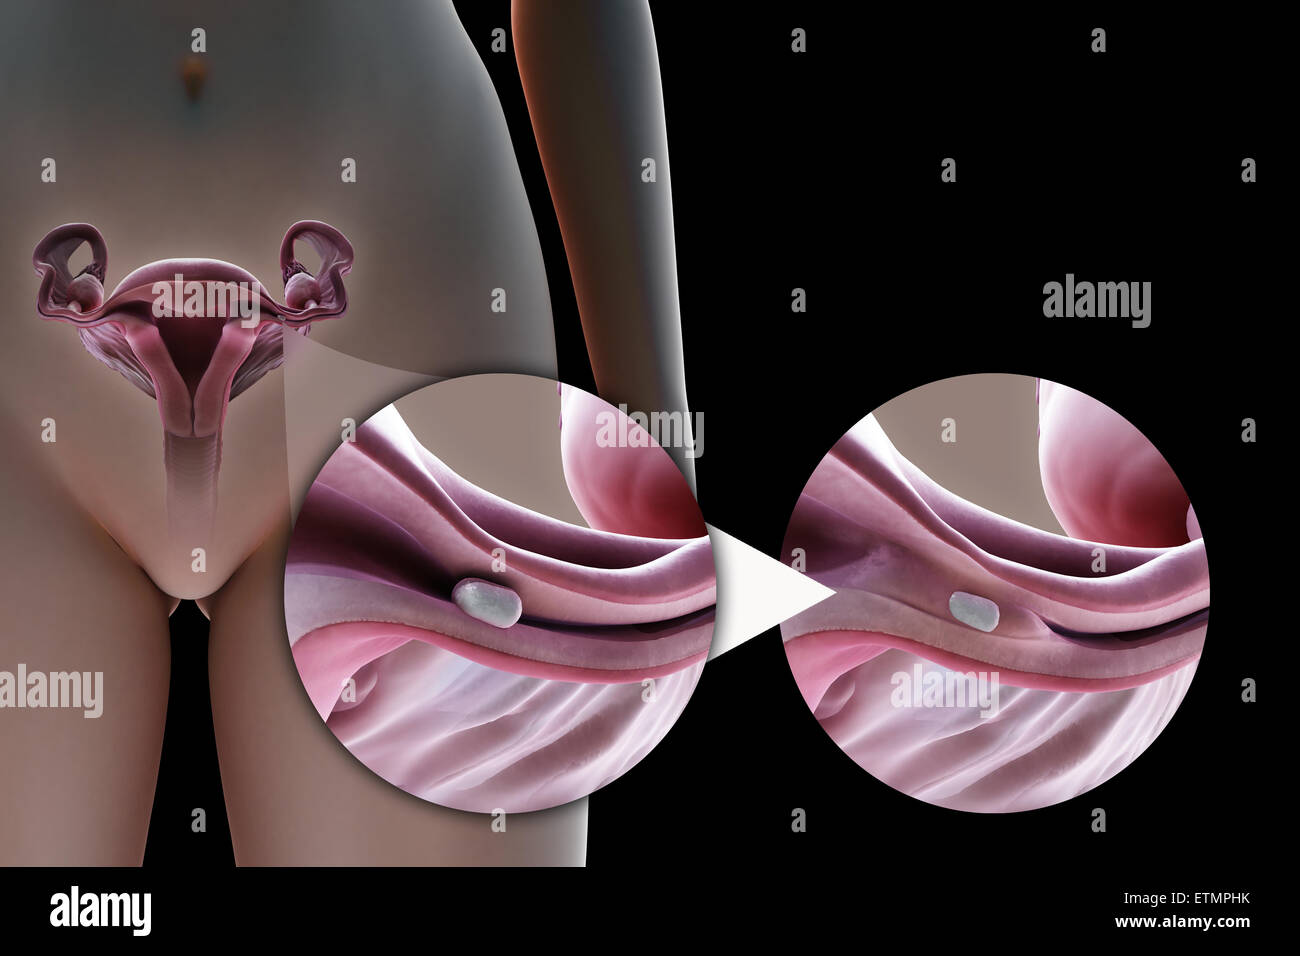 Illustration showing tubal ligation of the Fallopian tube by method of a silicone implant, used to block the tube by the growth of scar tissue and prevent fertilization. Stock Photo